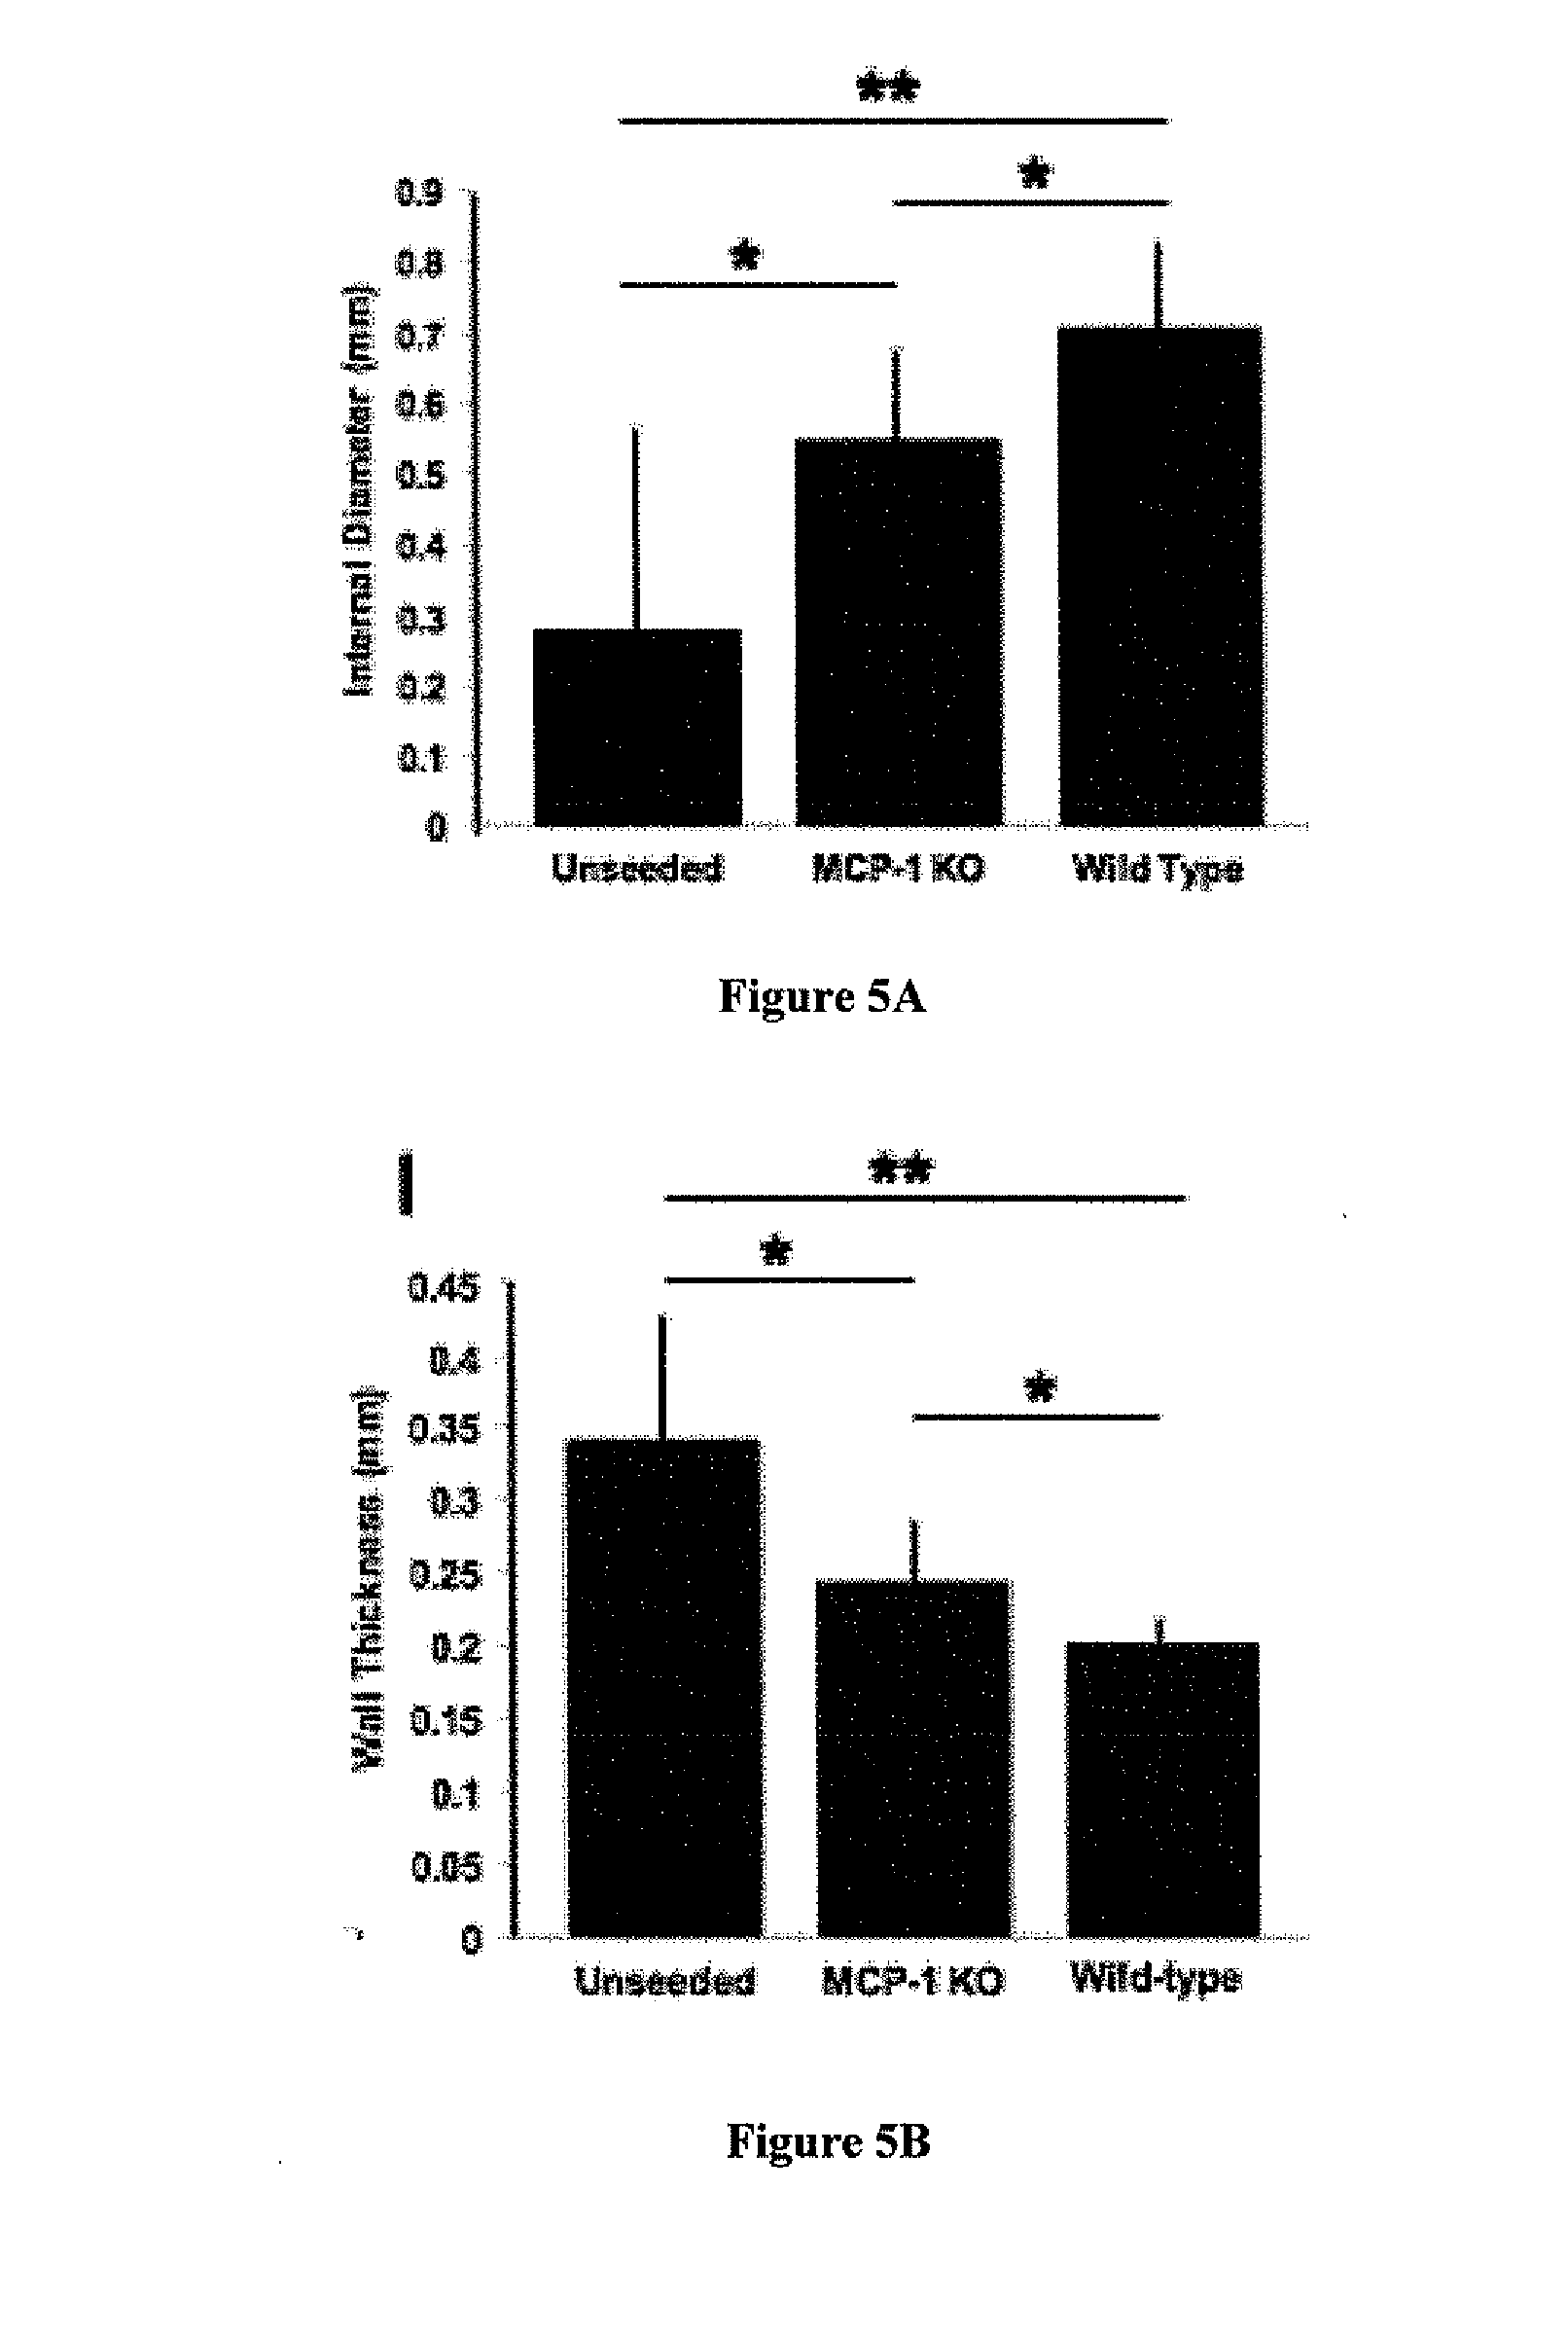 Compositions and Methods for Promoting Patency of Vascular Grafts